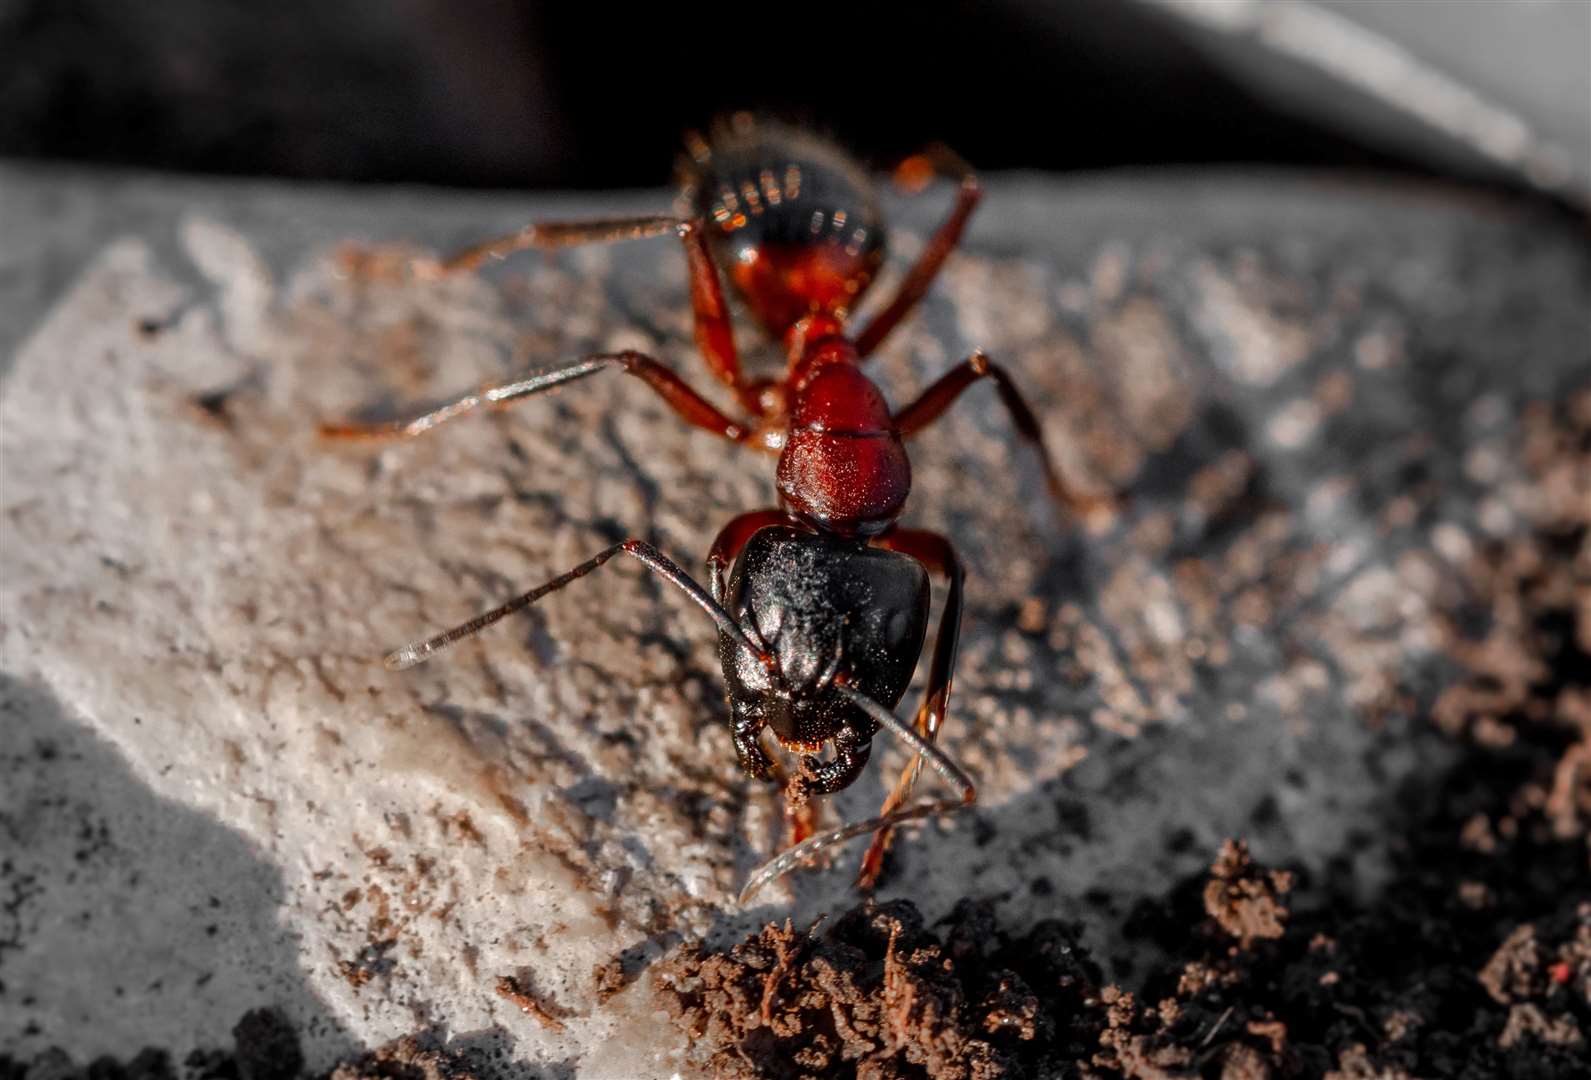 A close-up image of a red ant. Image: iStock photo.